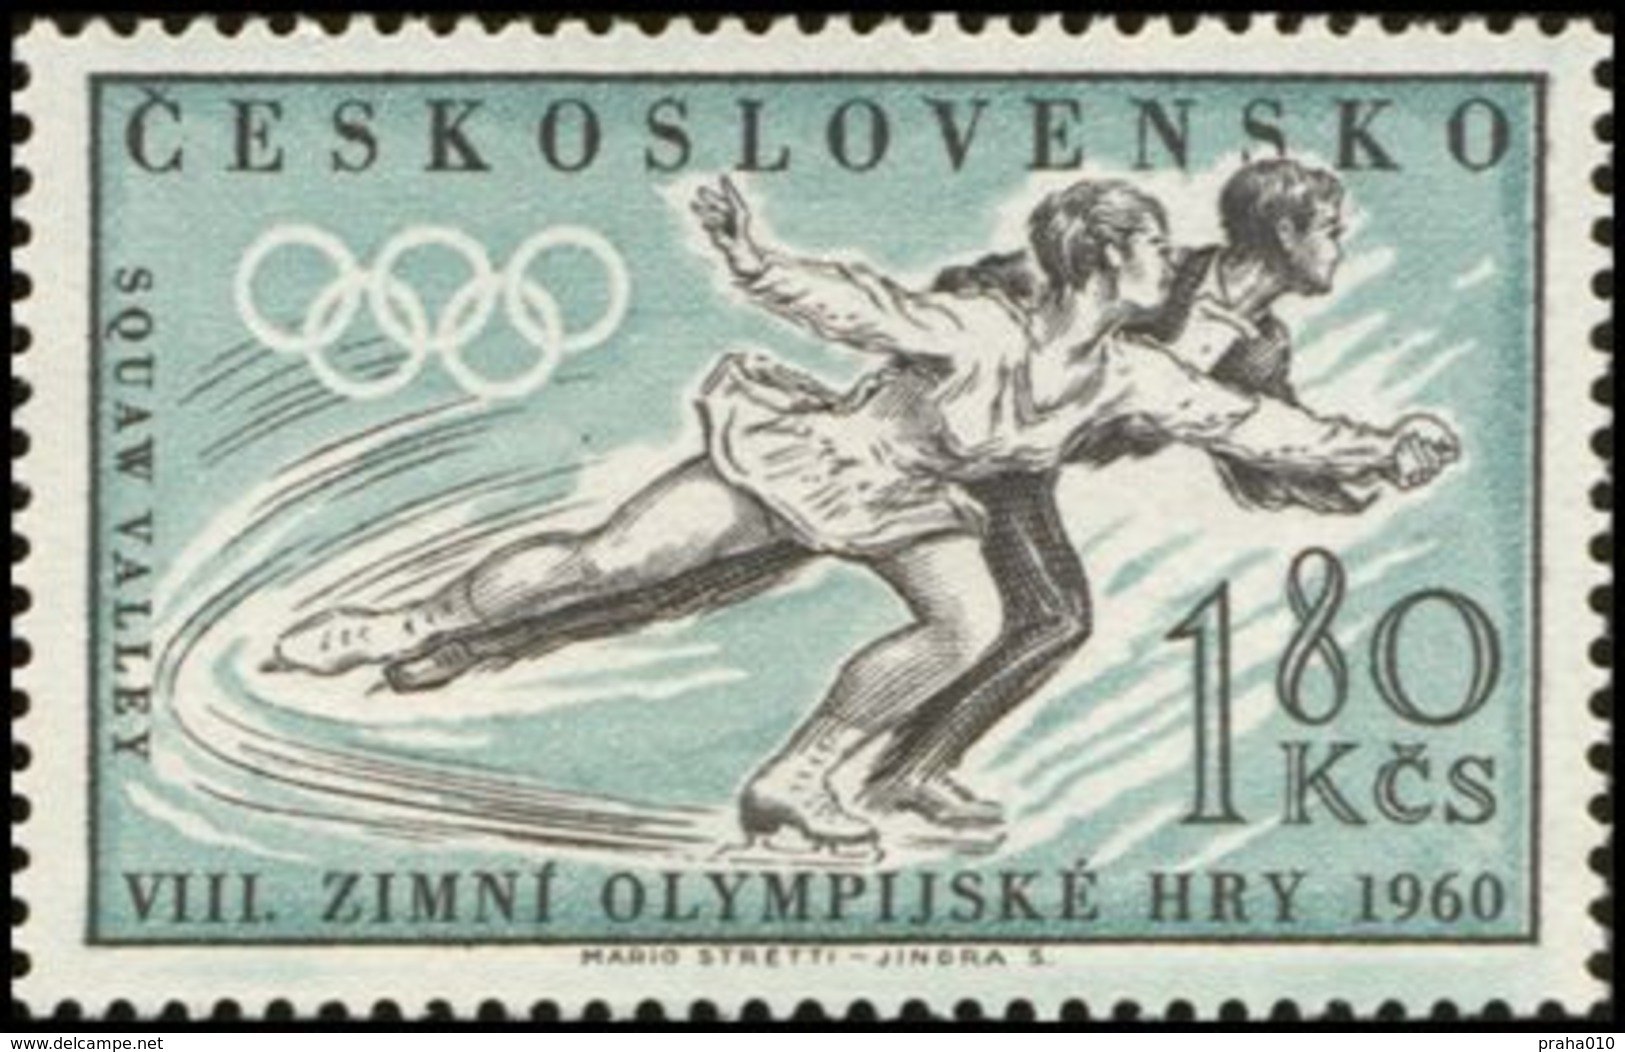 Czechoslovakia / Stamps (1960) 1100: Winter Olympic Games 1960 Squaw Valley (Figure Skating); Painter: Mario Stretti - Winter 1960: Squaw Valley